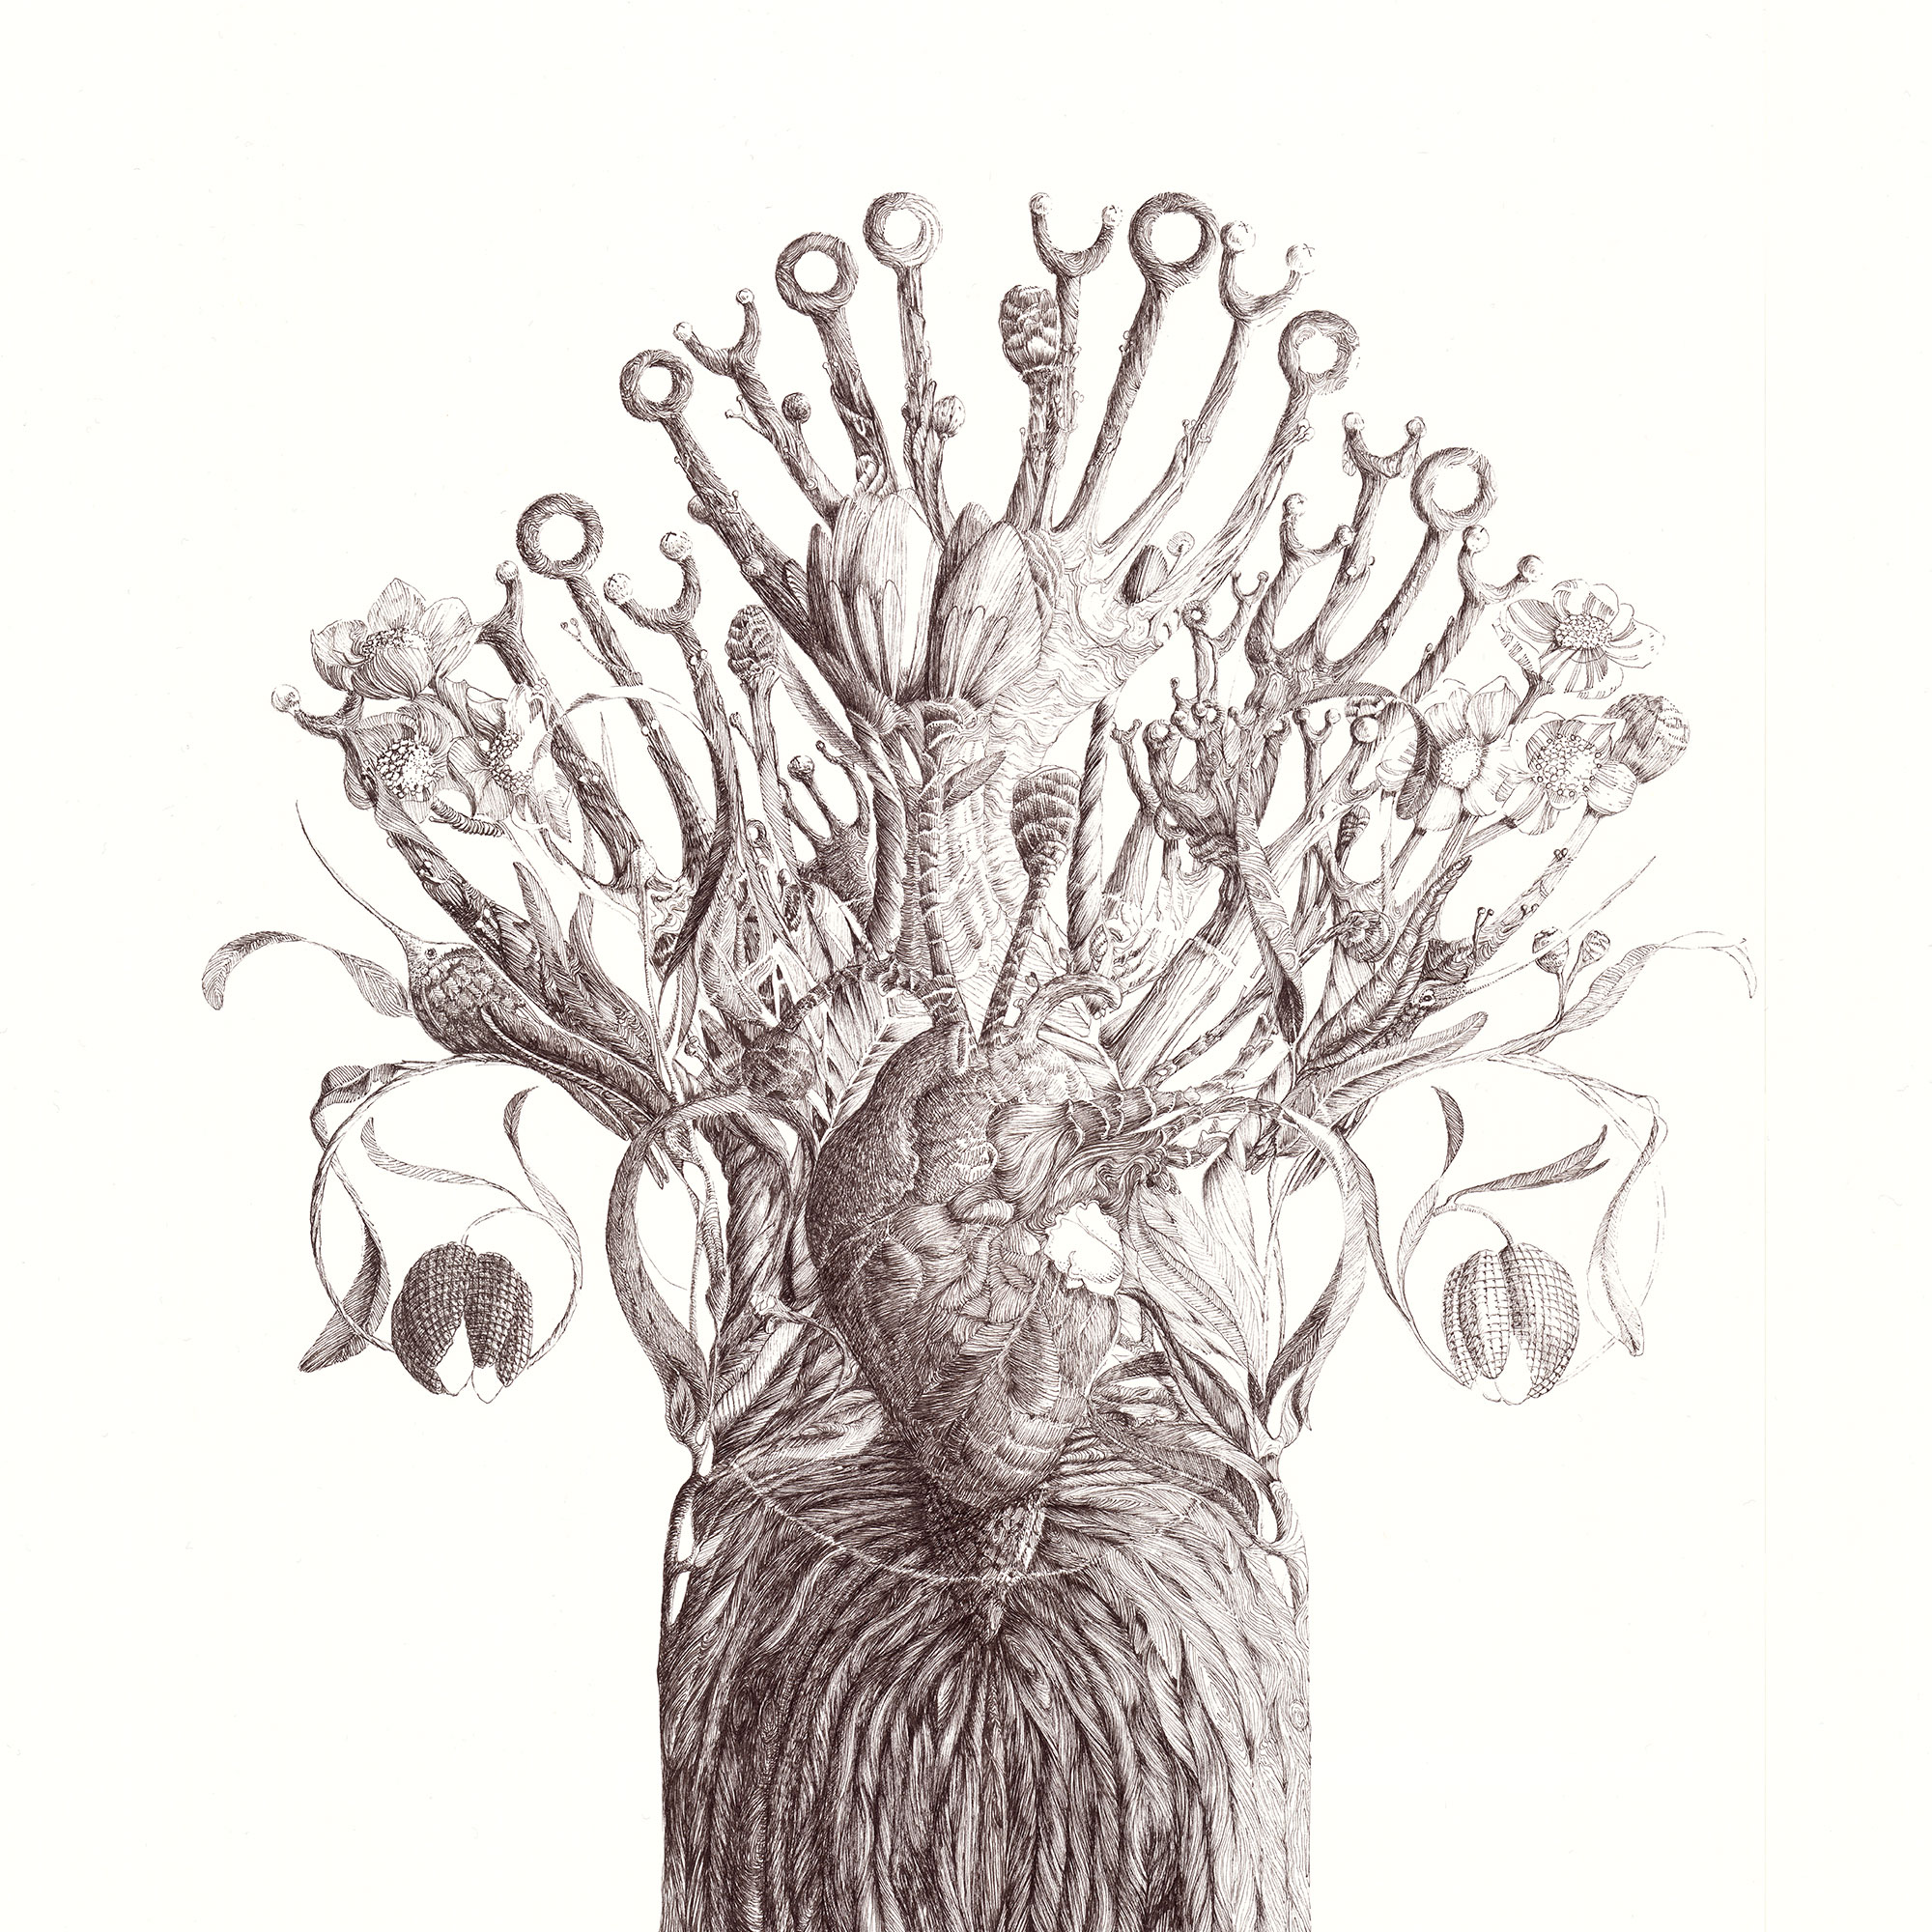 Sketched Tree of Life